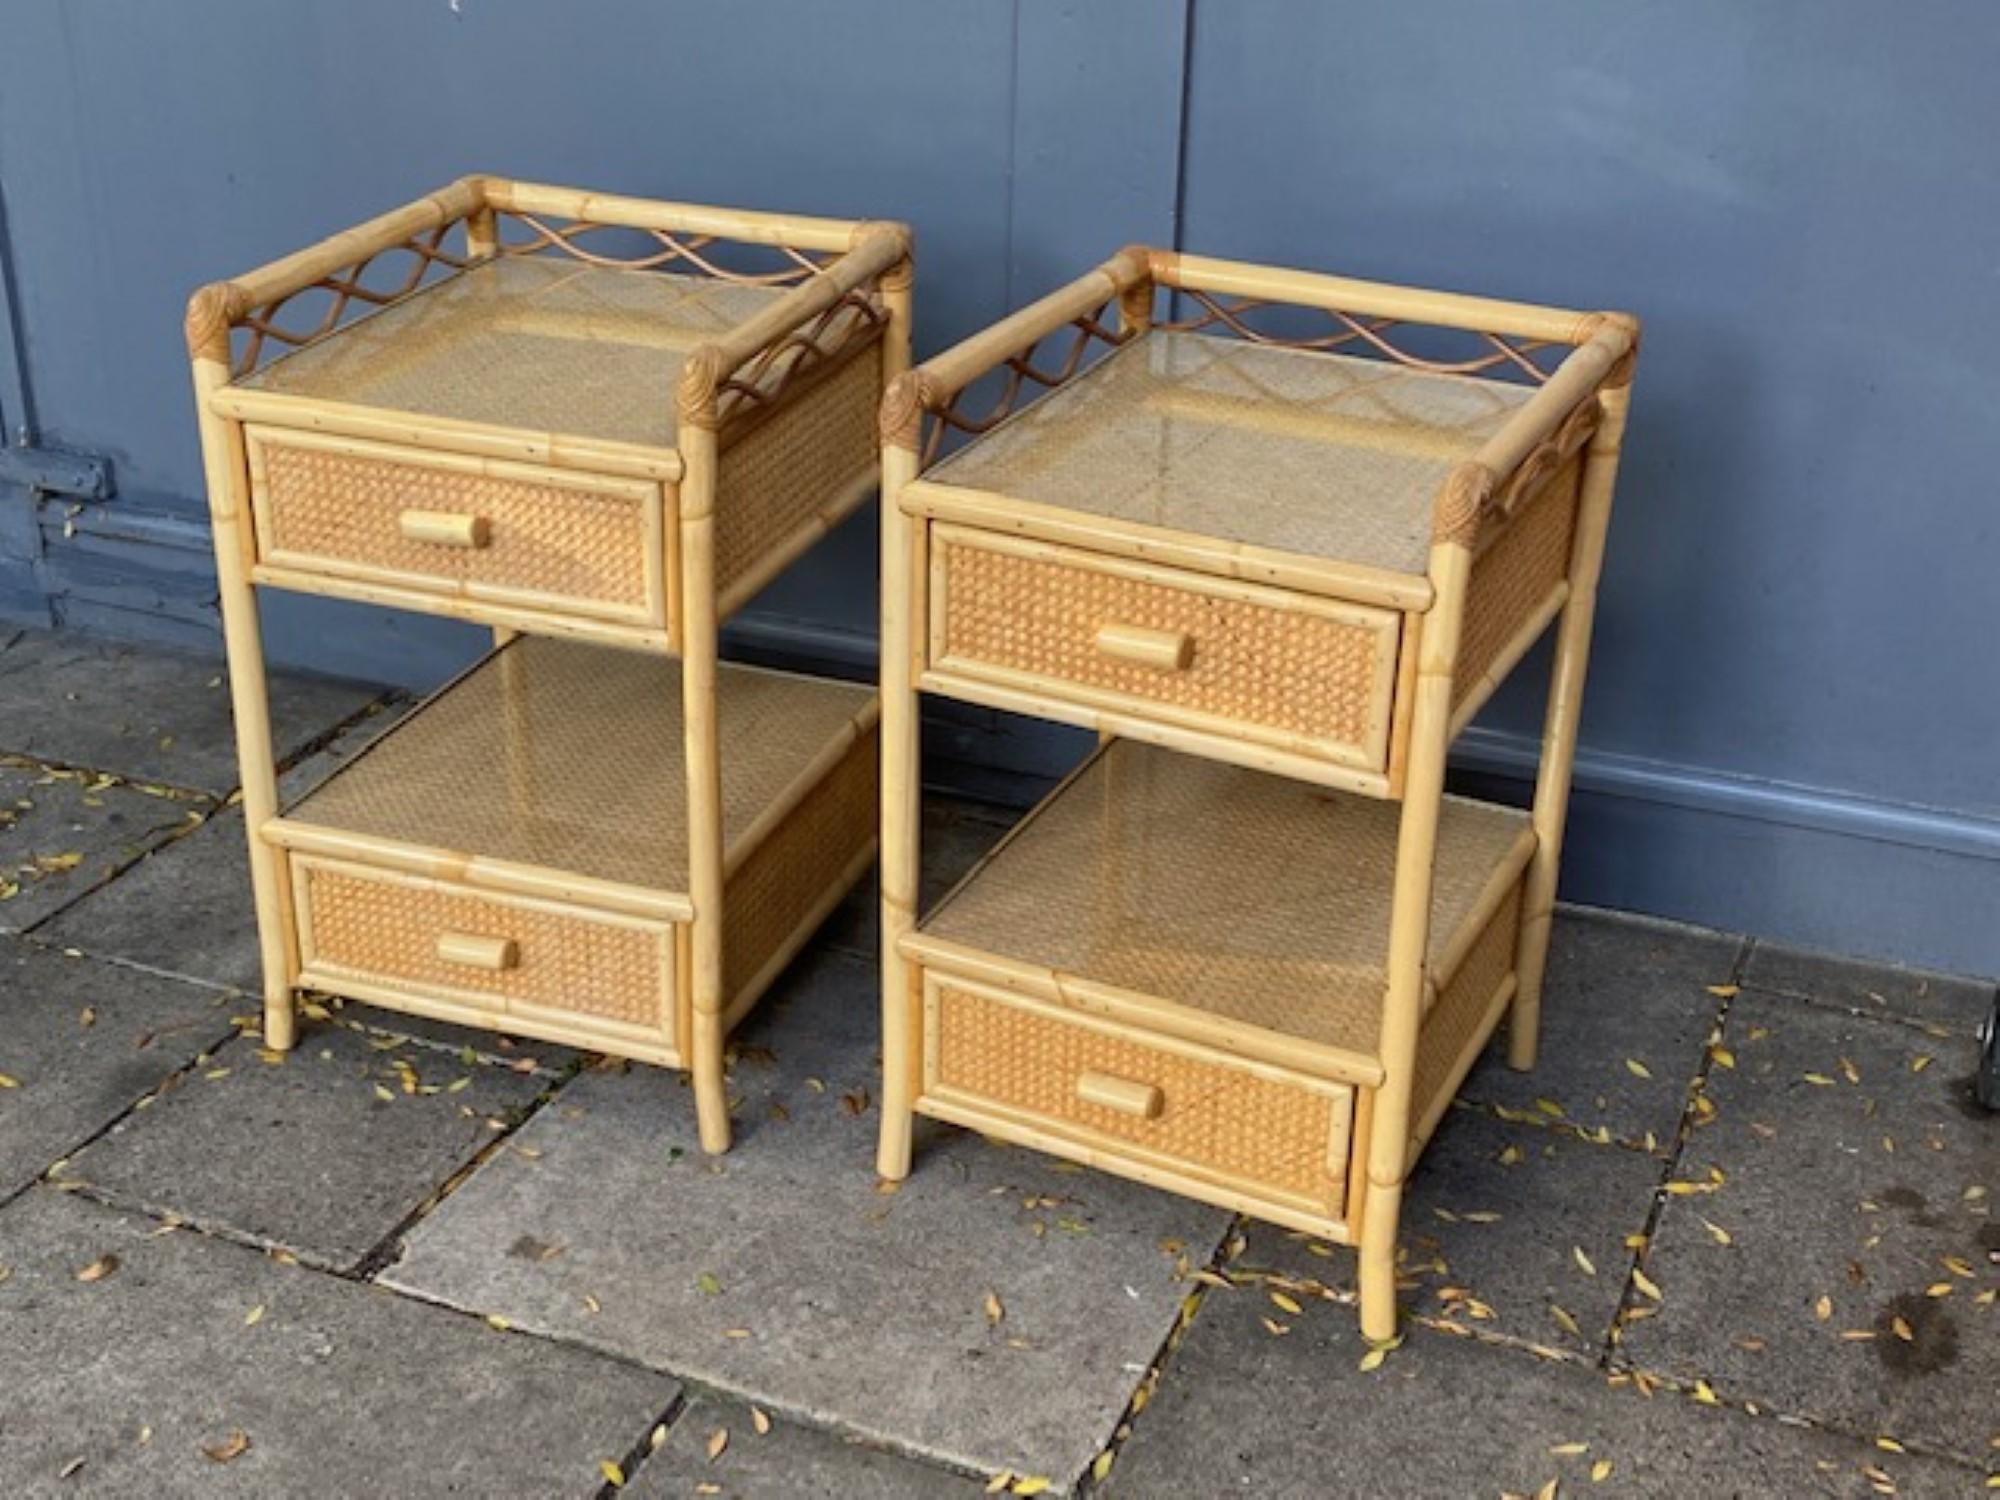 Pair of MCM Rattan / Cane Nightstands / Bedside Tables, Angraves, English, 1970s In Good Condition For Sale In Richmond, Surrey